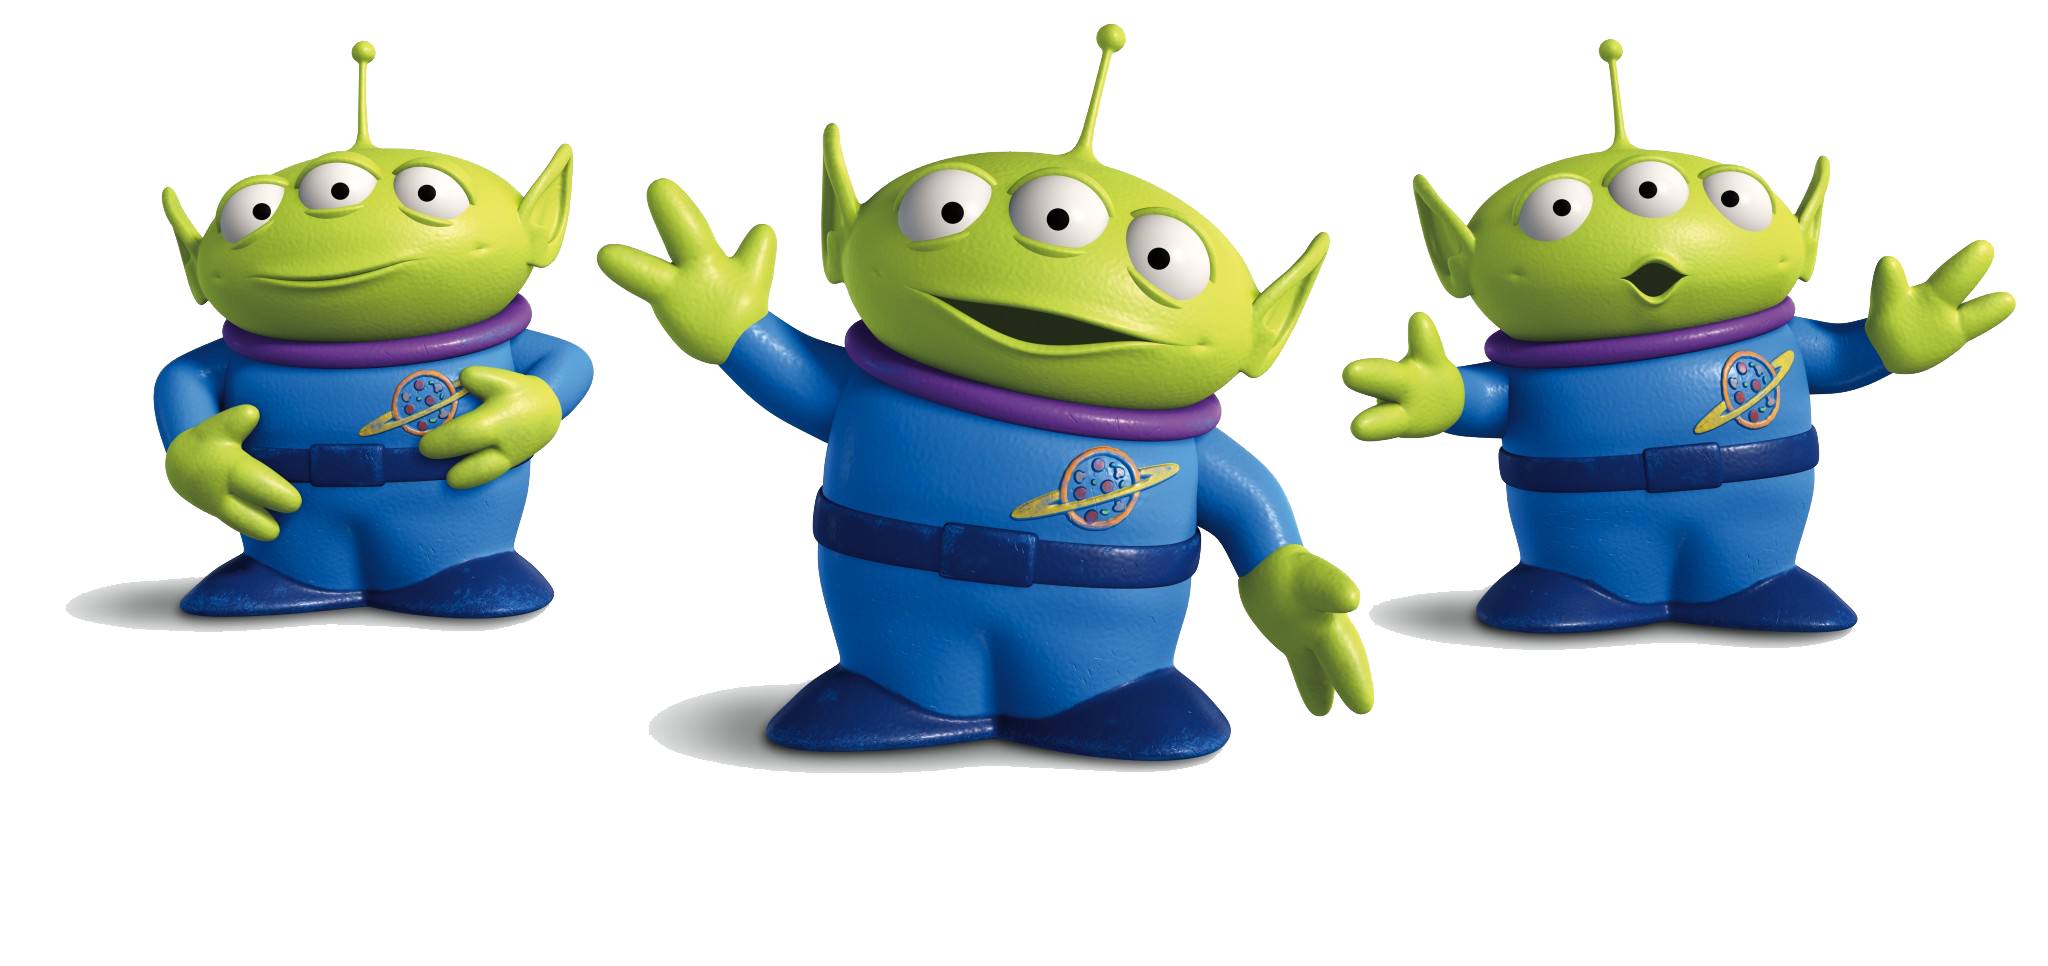 Alien Toy Free Photo PNG Image